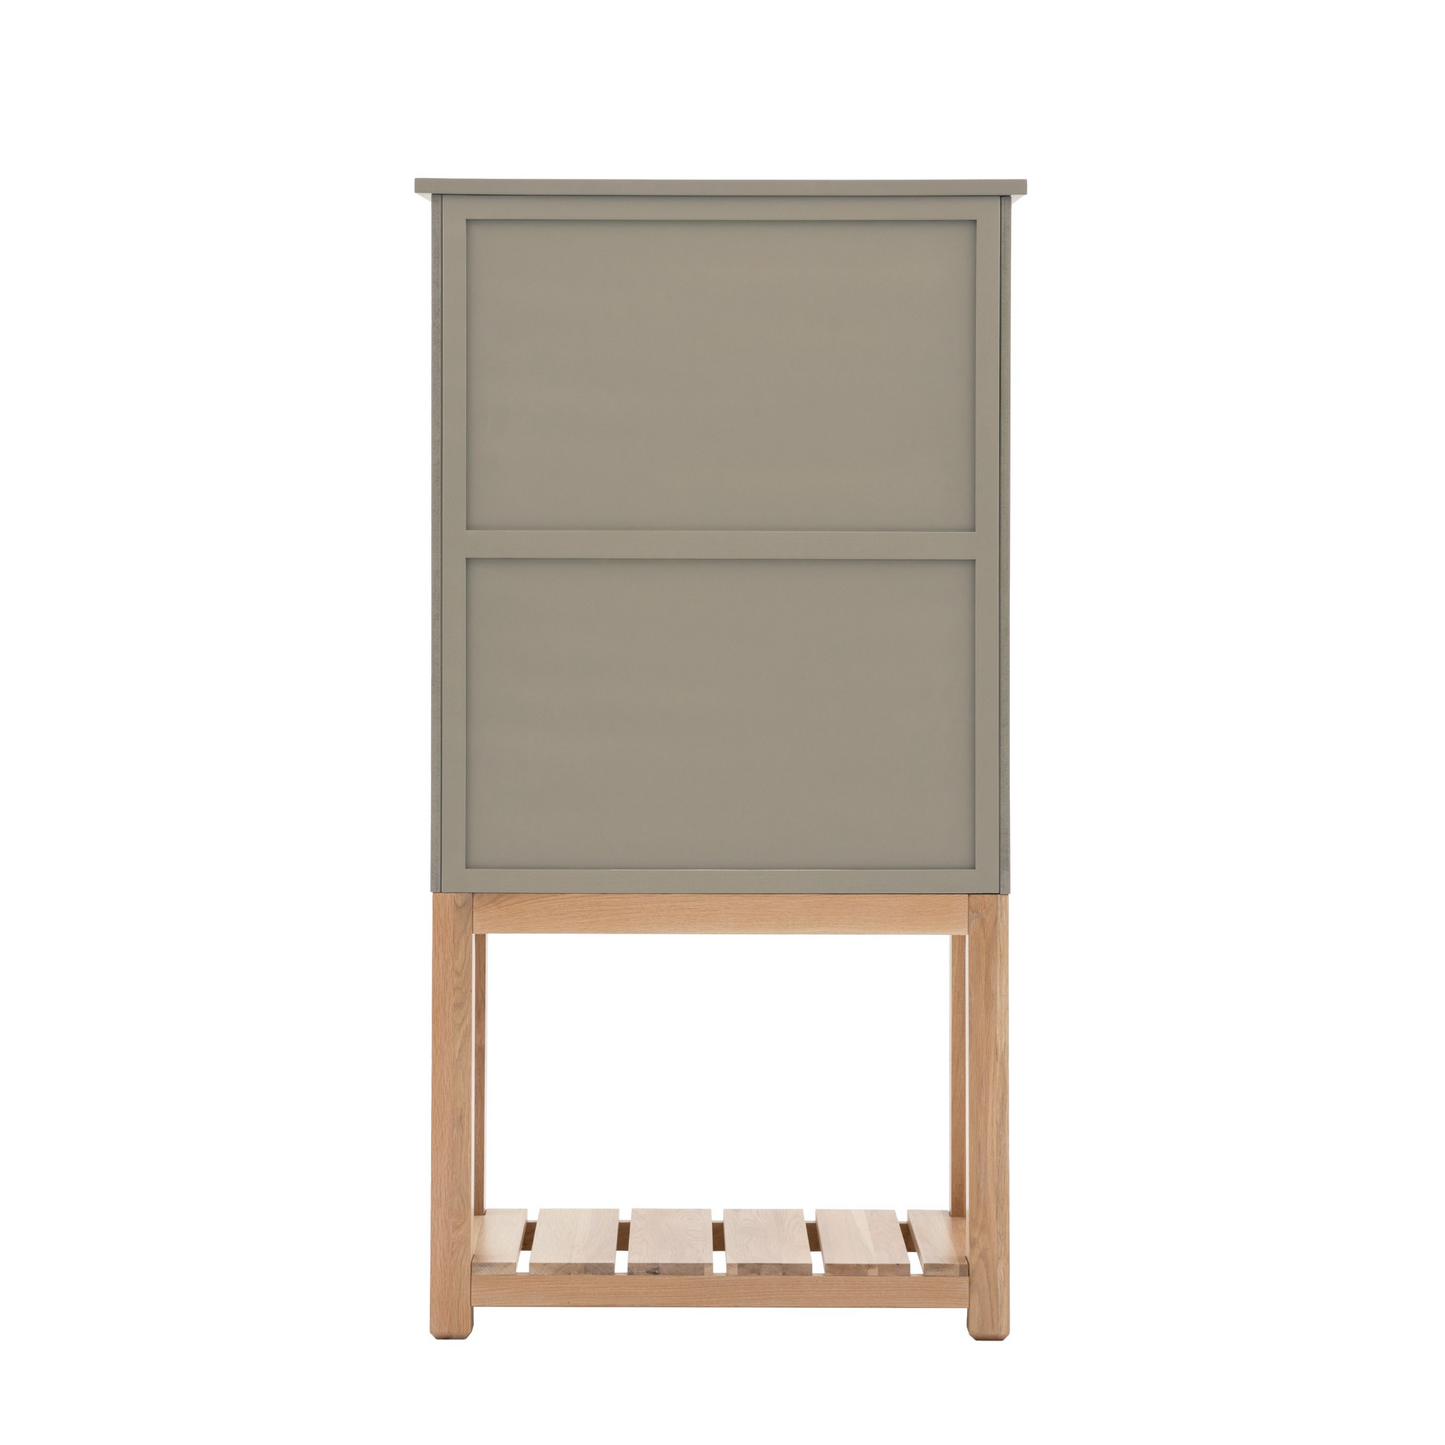 A Buckland 2 Door Storage Cupboard for interior decor at home with wooden legs.